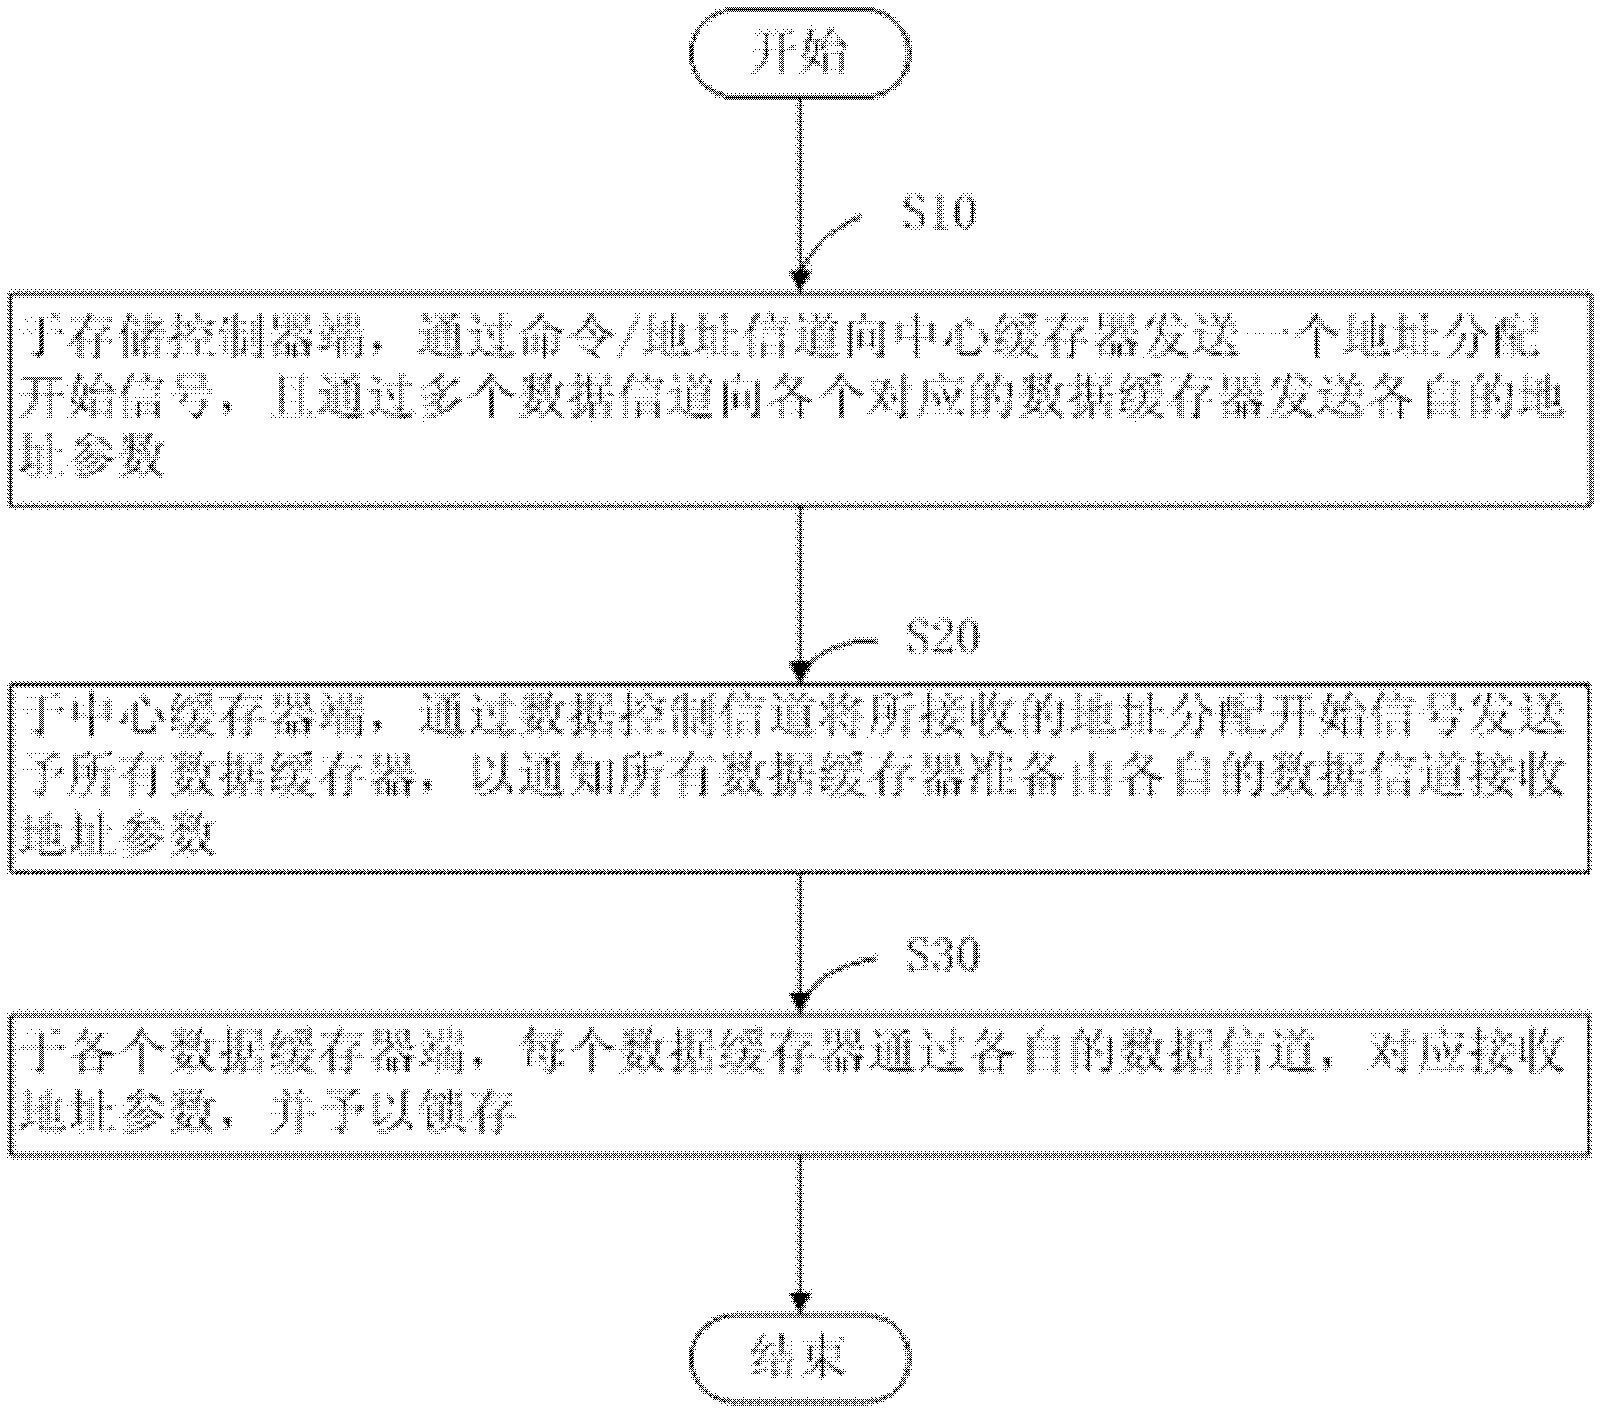 Address assignment method for data registers of distributed cache chipset